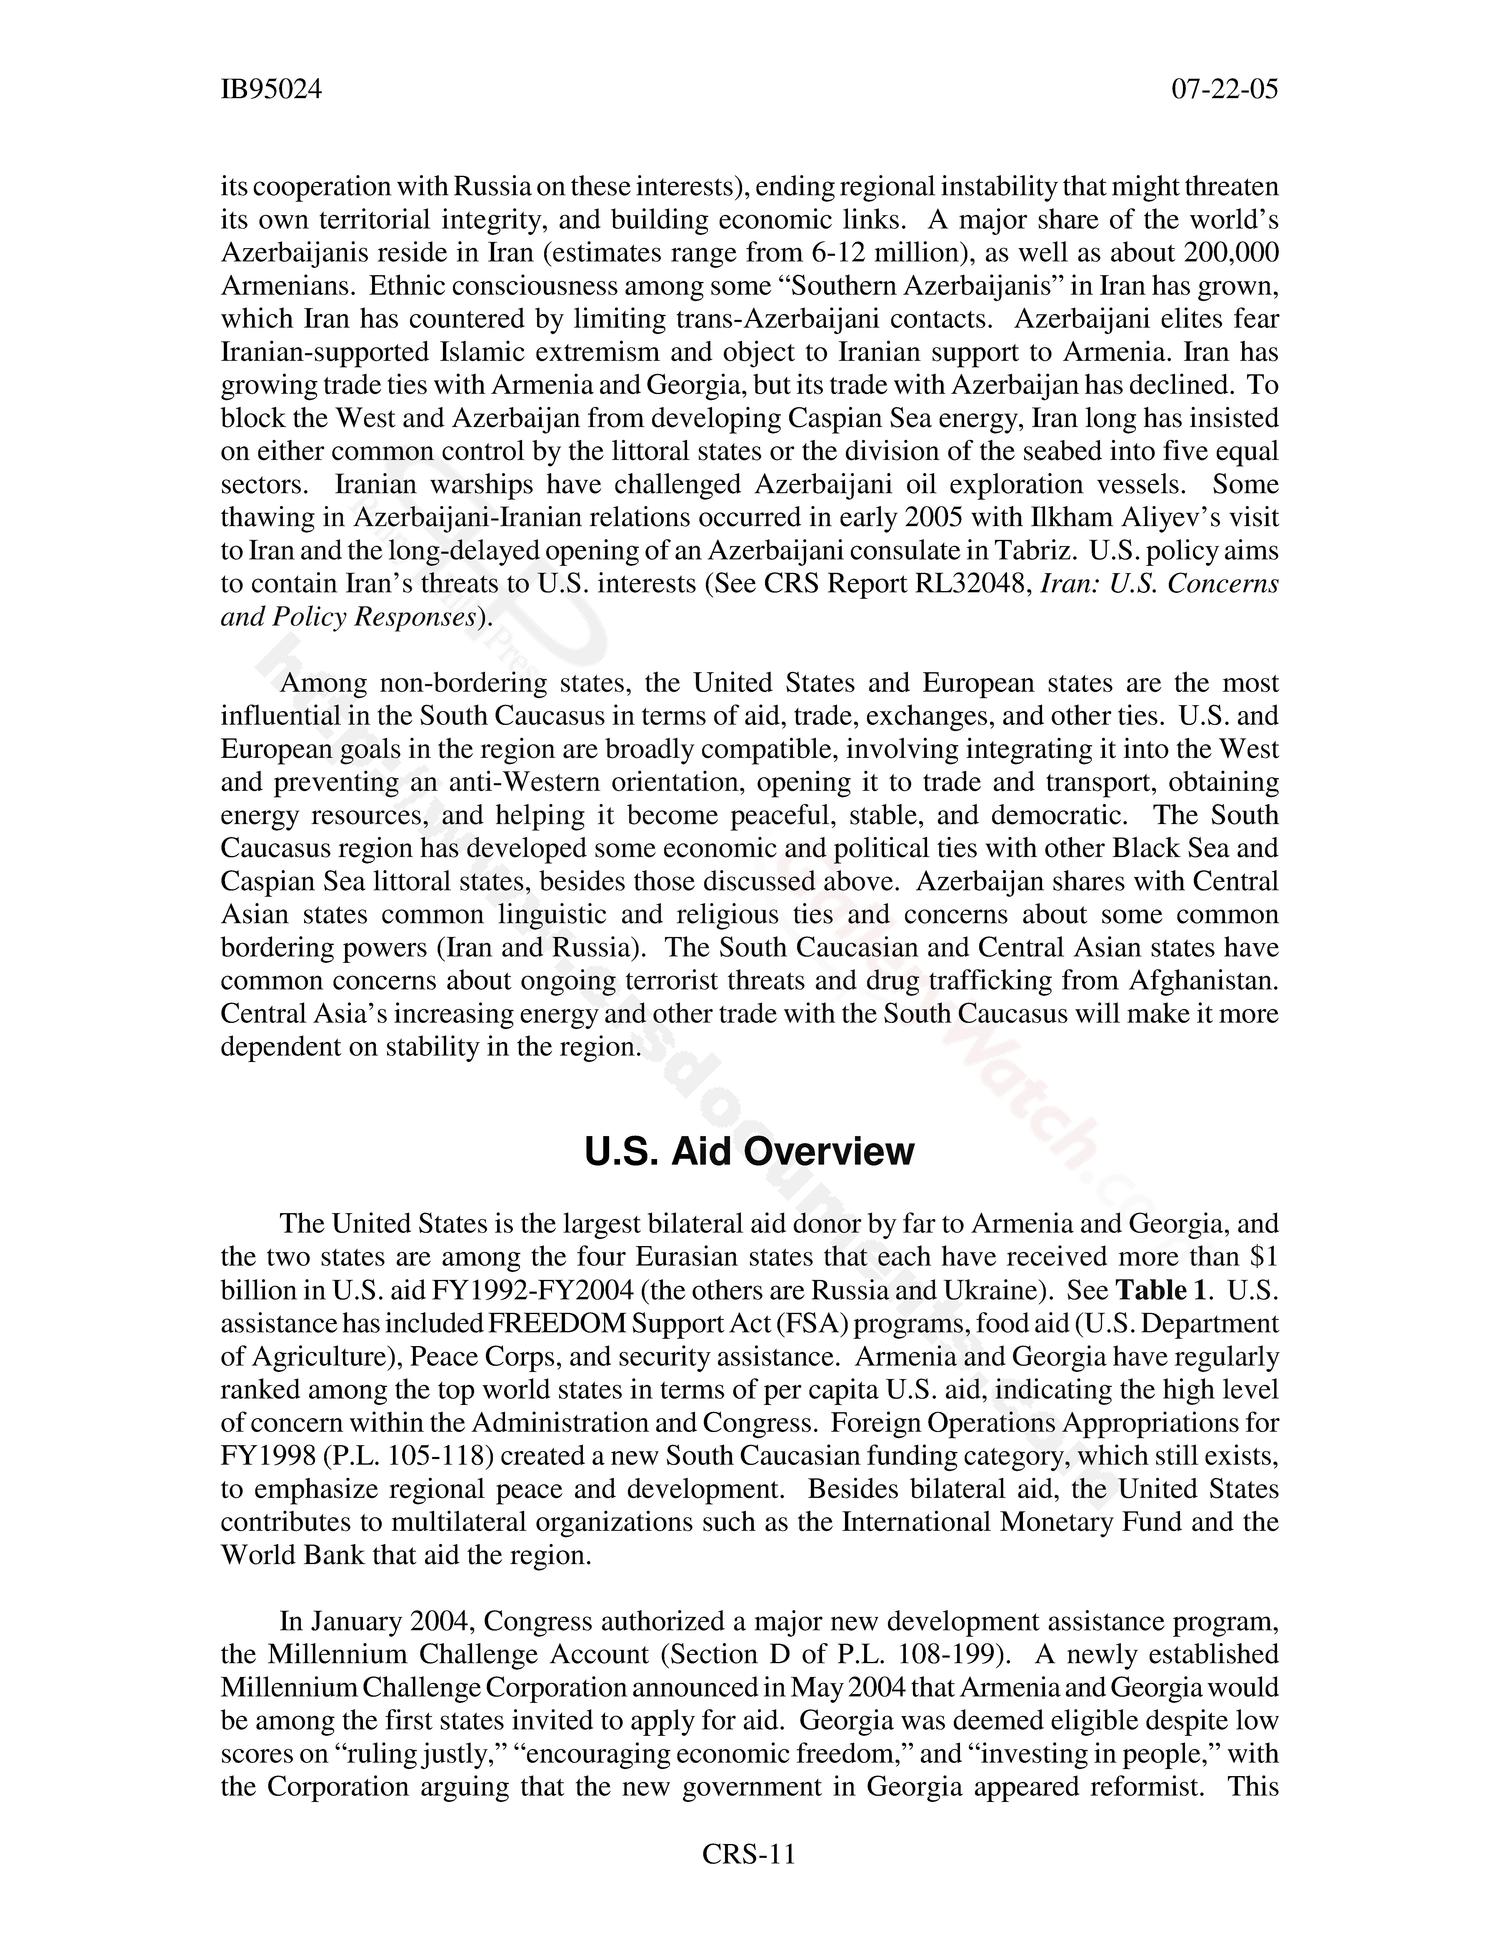 Armenia, Azerbaijan, and Georgia: Political Developments and Implications for U.S. Interests
                                                
                                                    [Sequence #]: 14 of 19
                                                